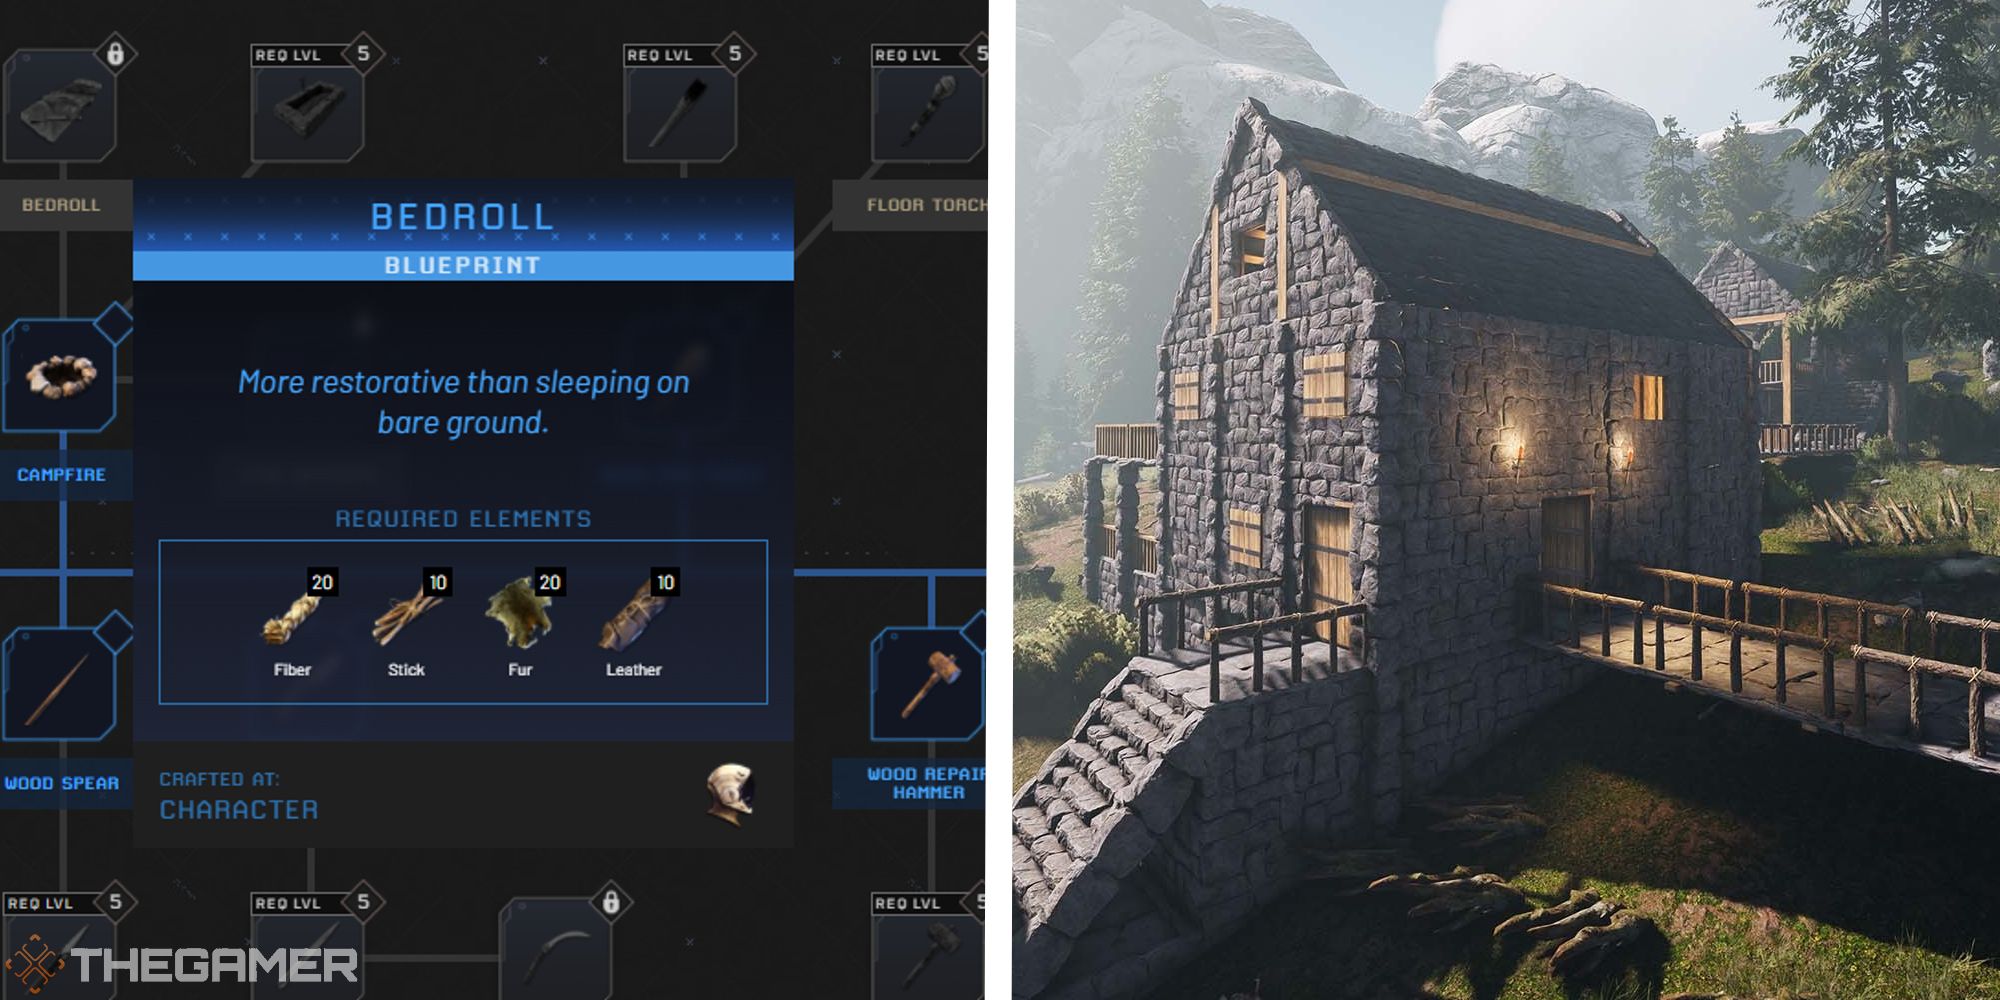 image of bedroll on technology tree next to image of stone house